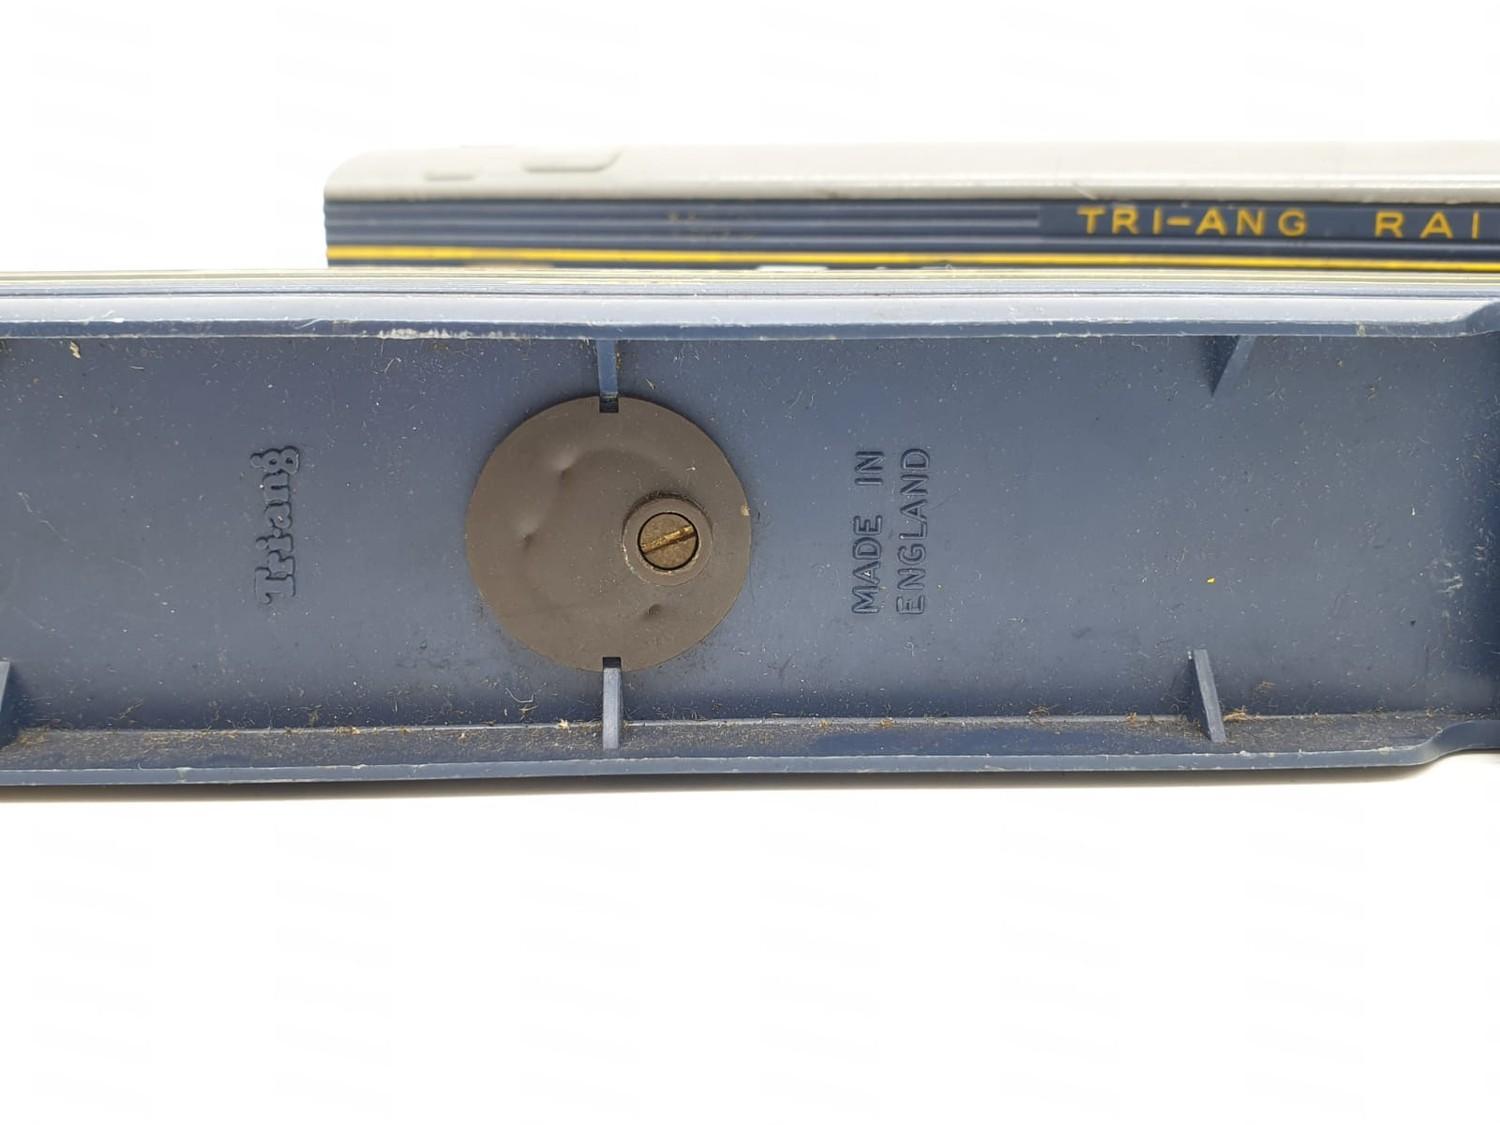 2 Triang Railway Carriages for OO Gauge - Image 6 of 6